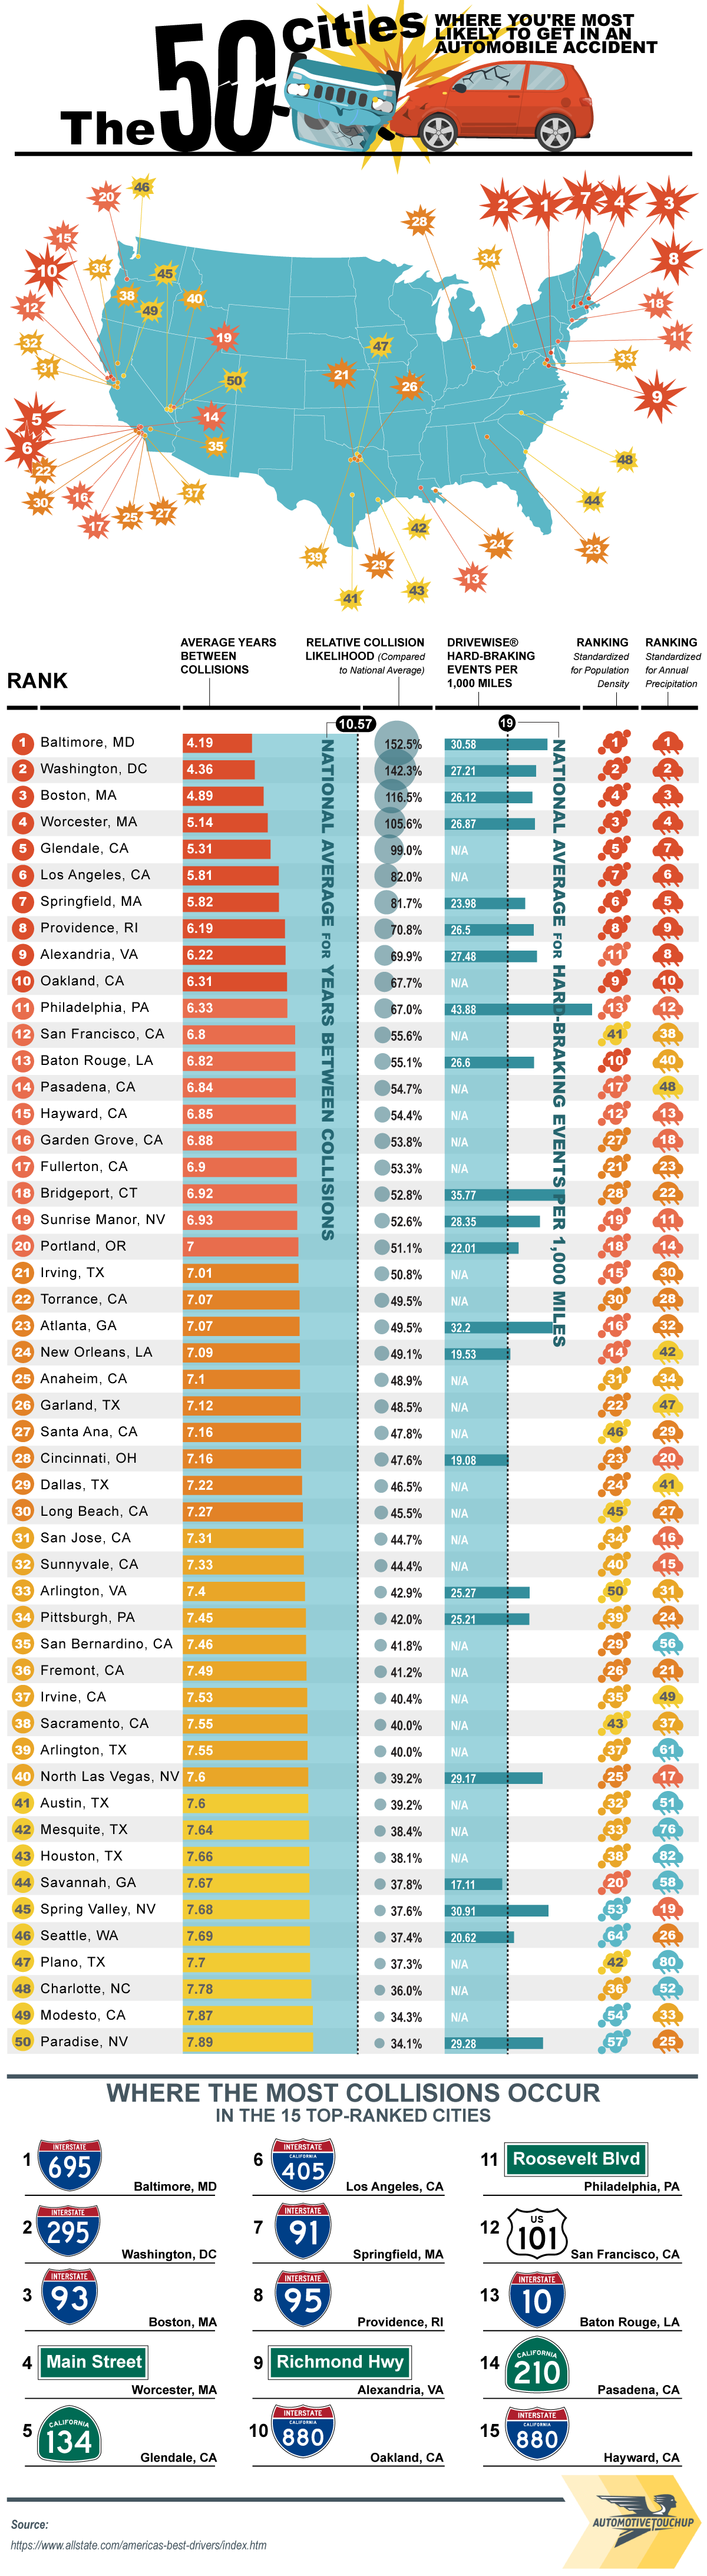 The 50 Cities Where You're Most Likely to Get in an Automobile Accident